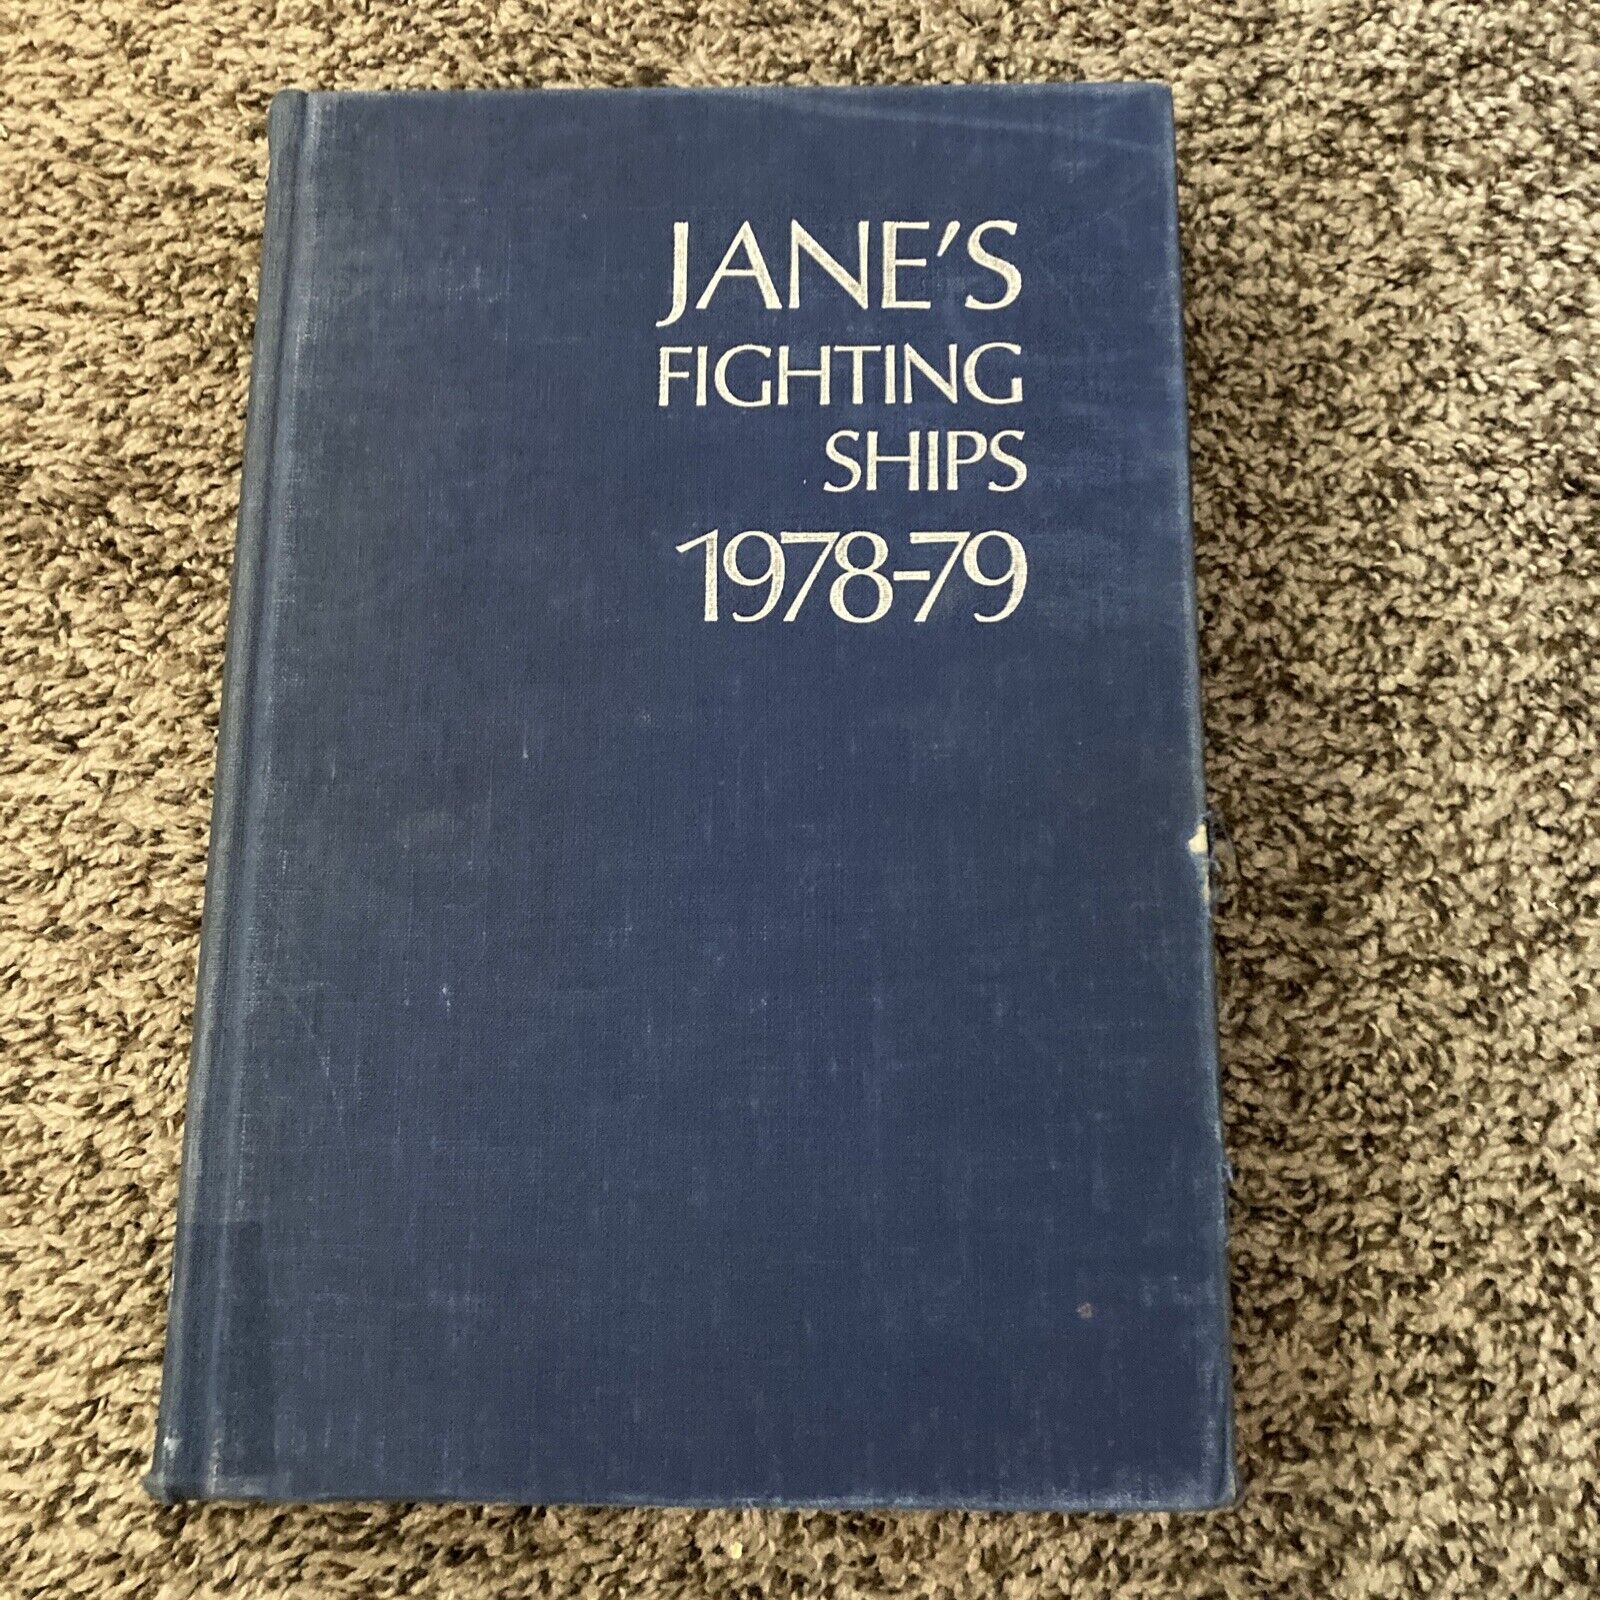 Jane's Fighting Ships Naval Reference Book Military 1978-79